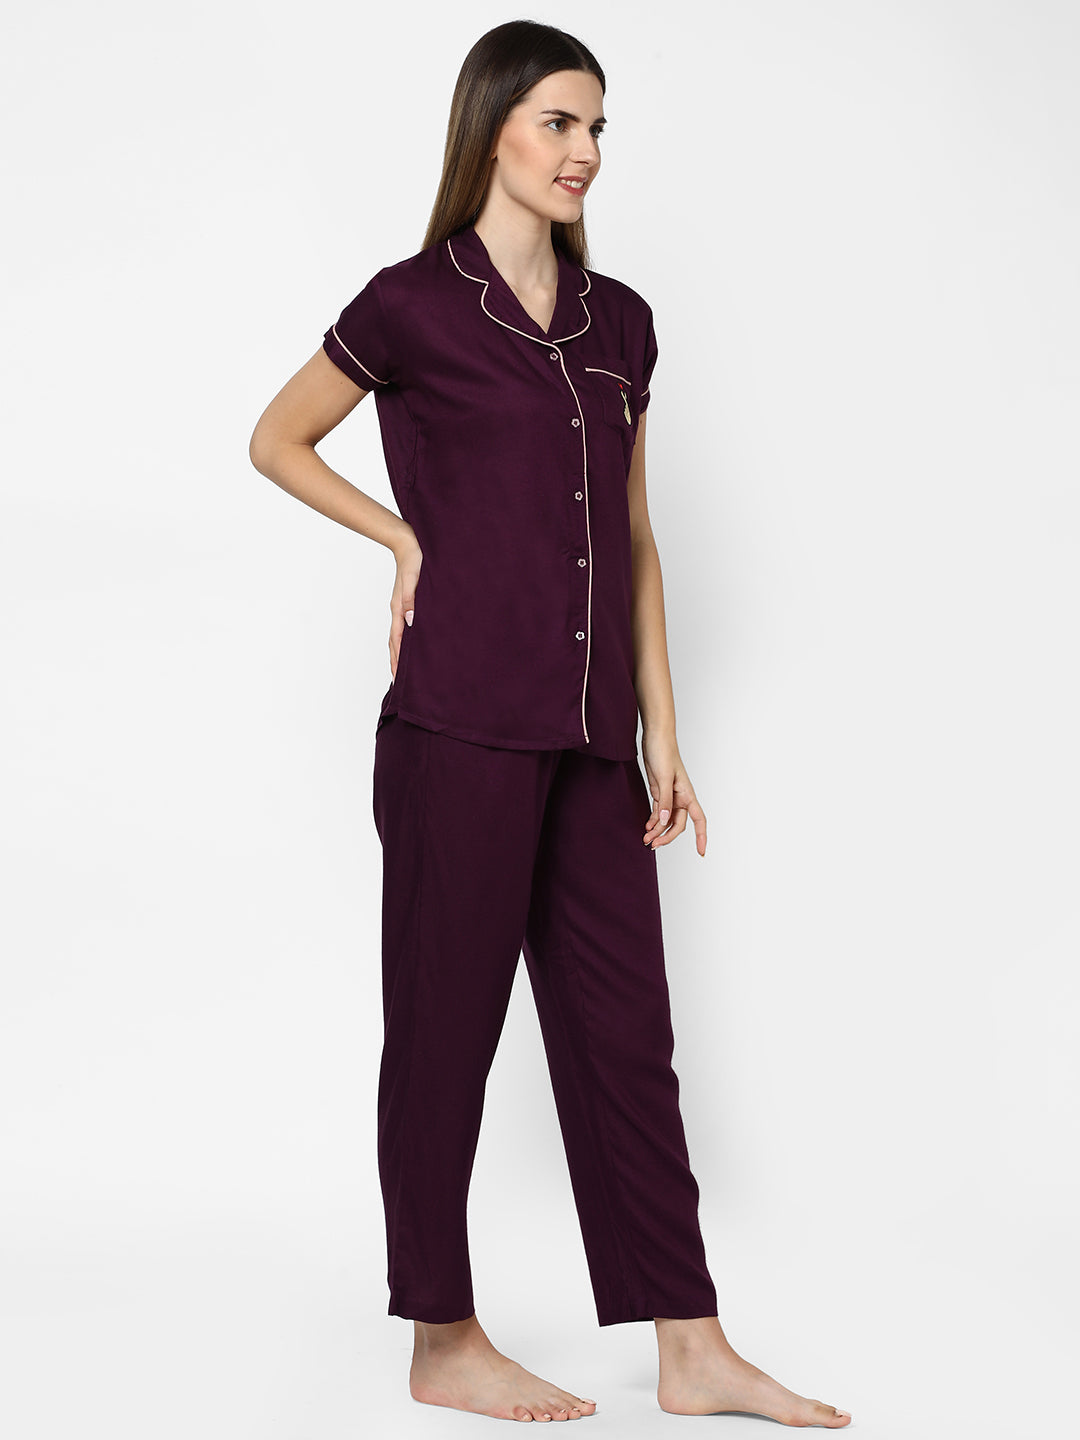 Evolove Pyjamas Top Pants Set for Women for Daily Use Winter Night Wear with Pockets Buttons Elastic Waist Viscose Liva Super Soft Comfortable ( S to 2XL Size )